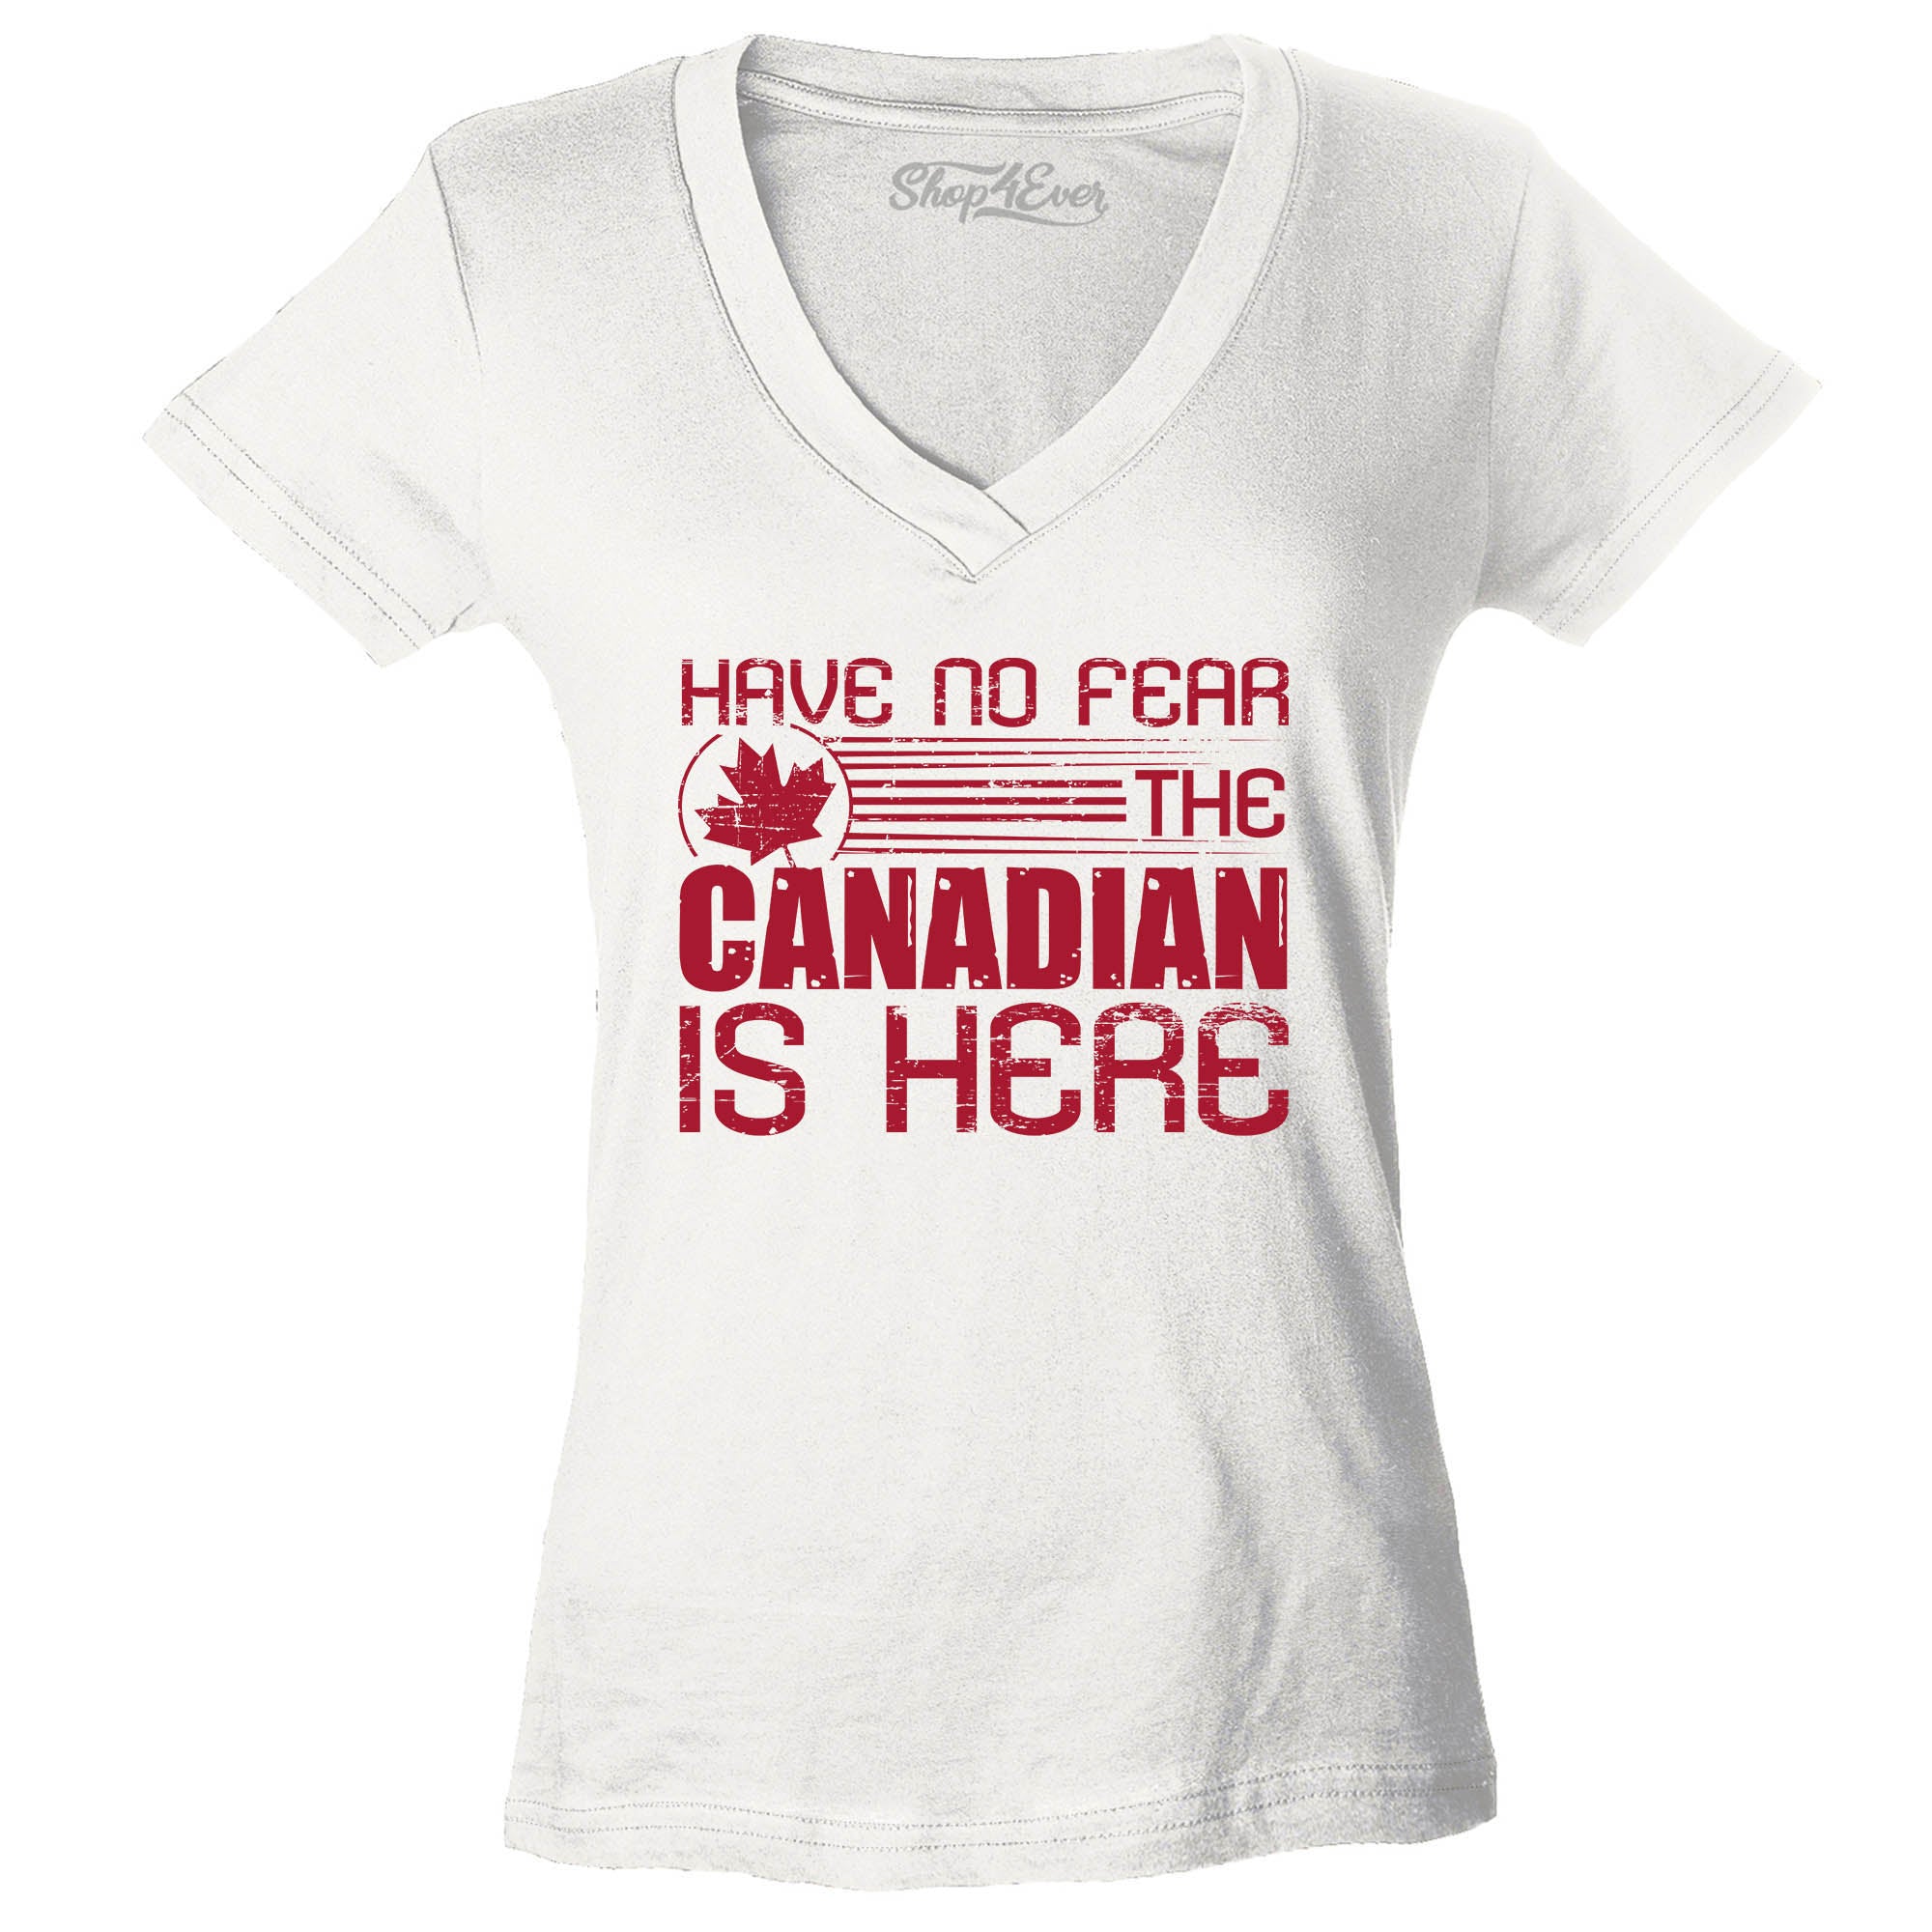 Have No Fear The Canadian is Here Canada Pride Women's V-Neck T-Shirt Slim Fit